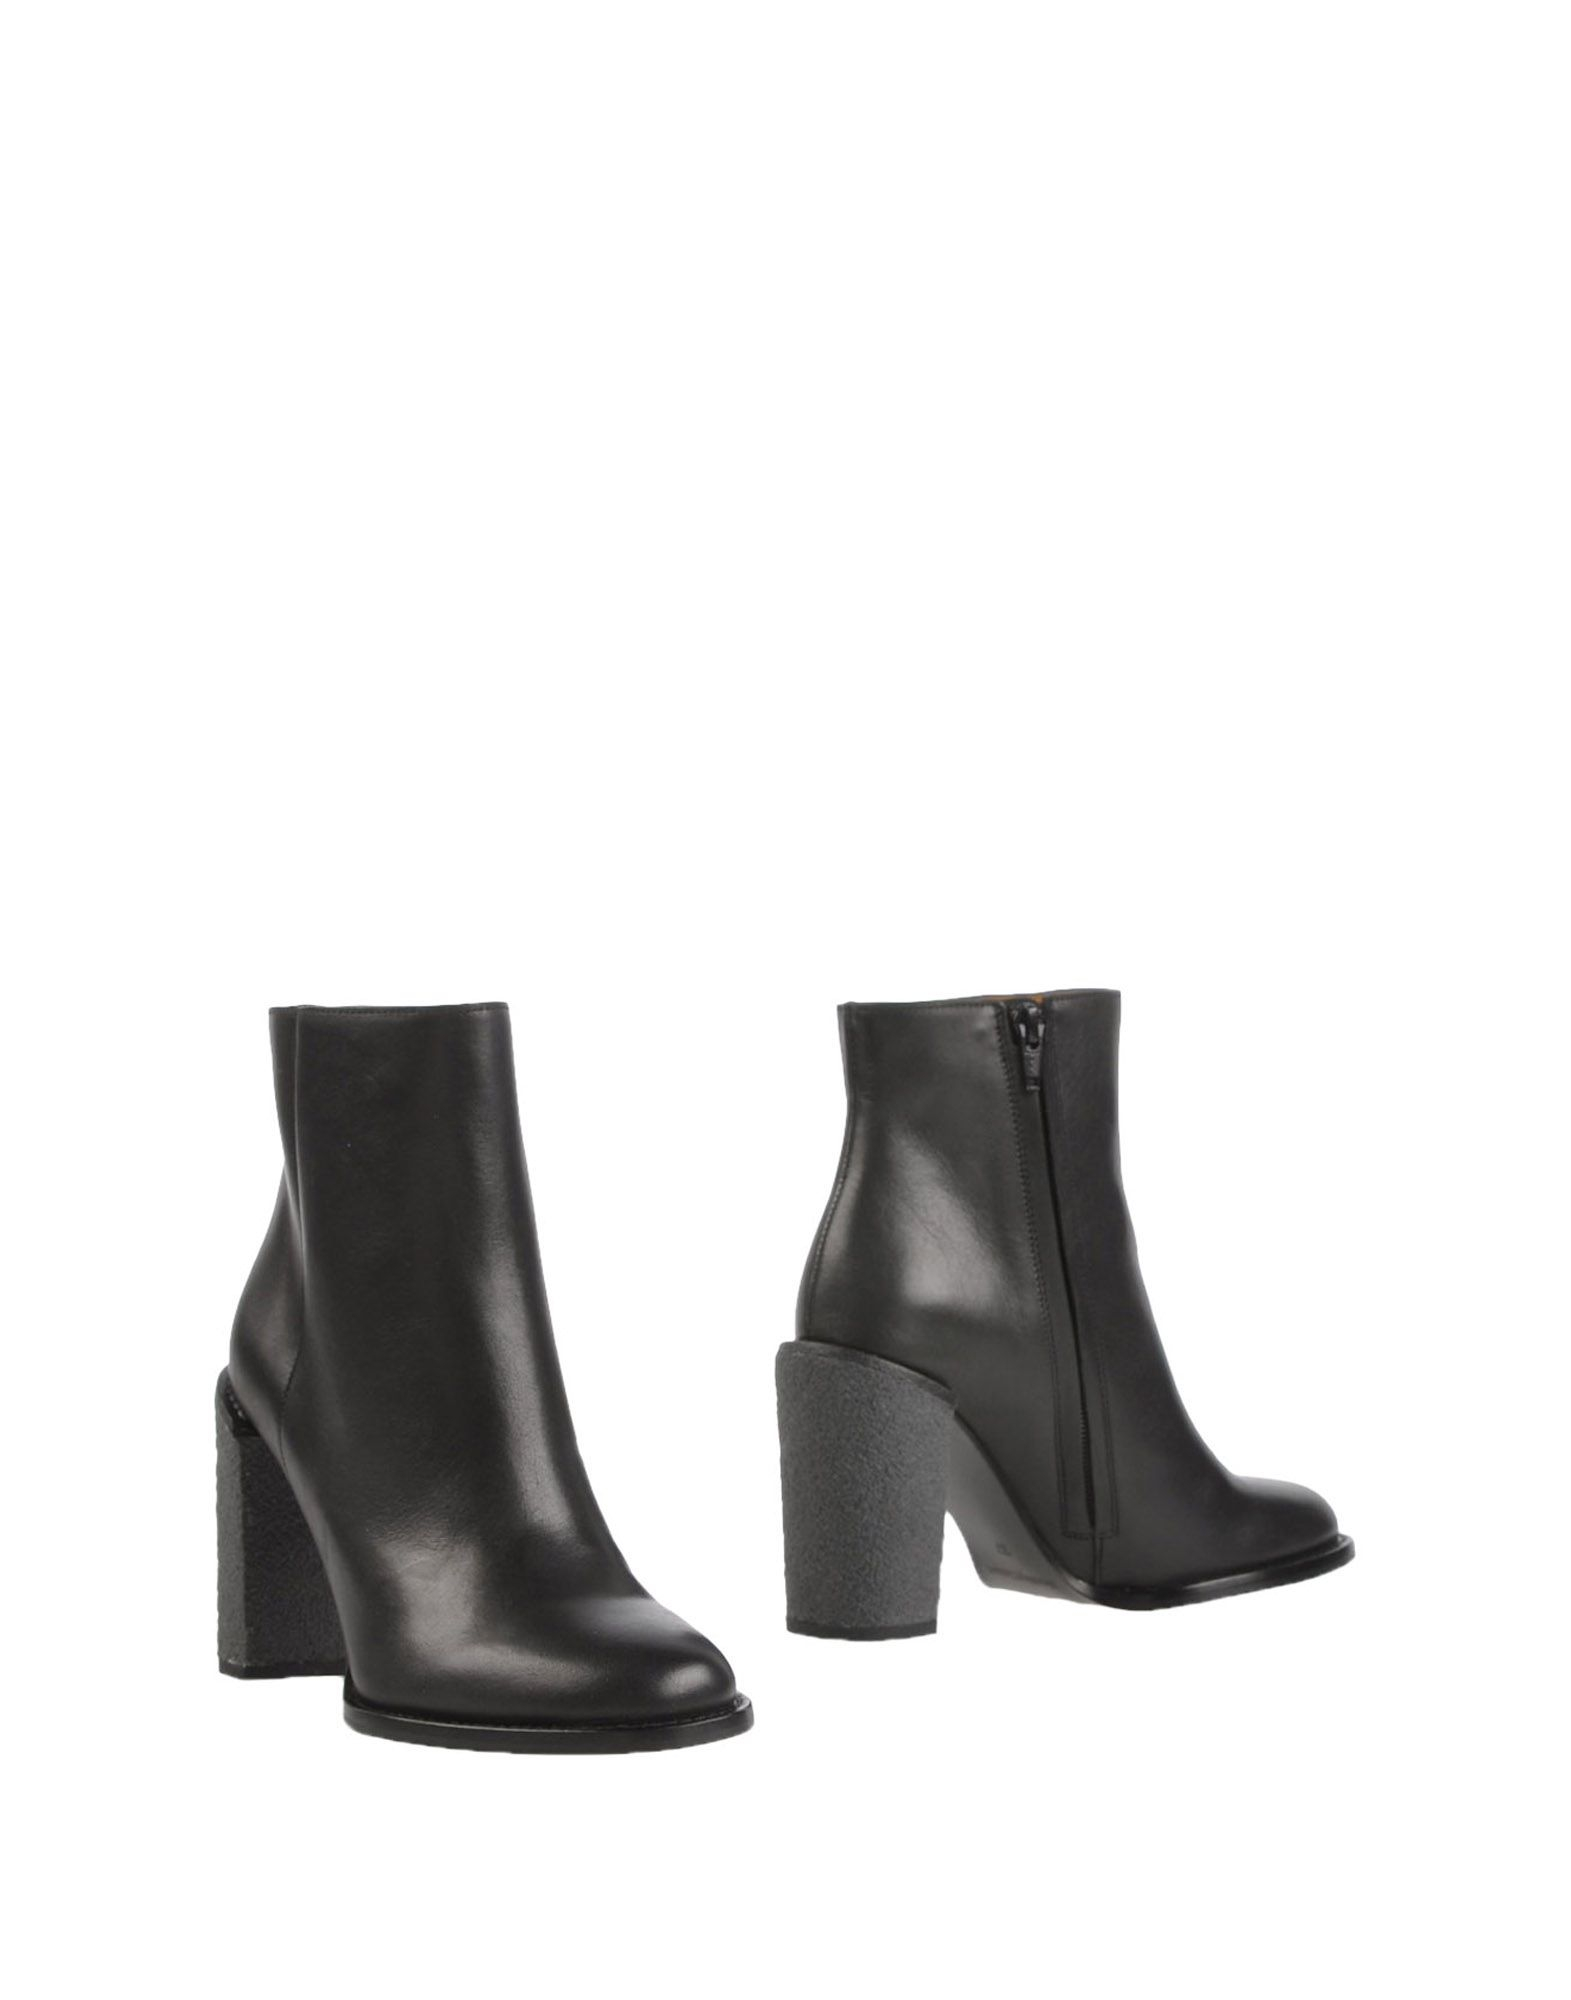 Lyst - See By Chloé Ankle Boots in Black